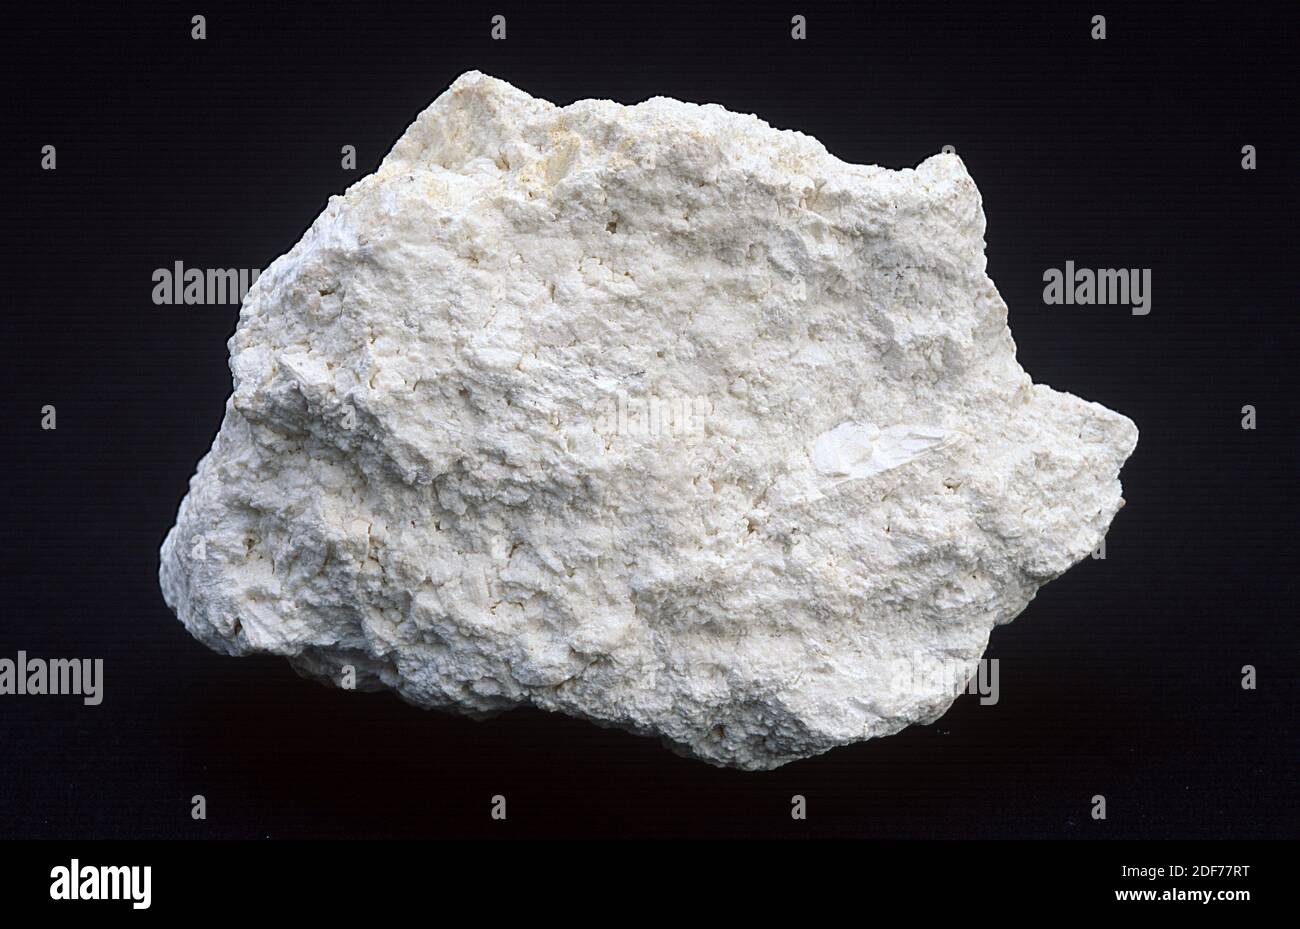 Chalk is a kind of limestone porous and white, composed of calcite. Sample. Stock Photo